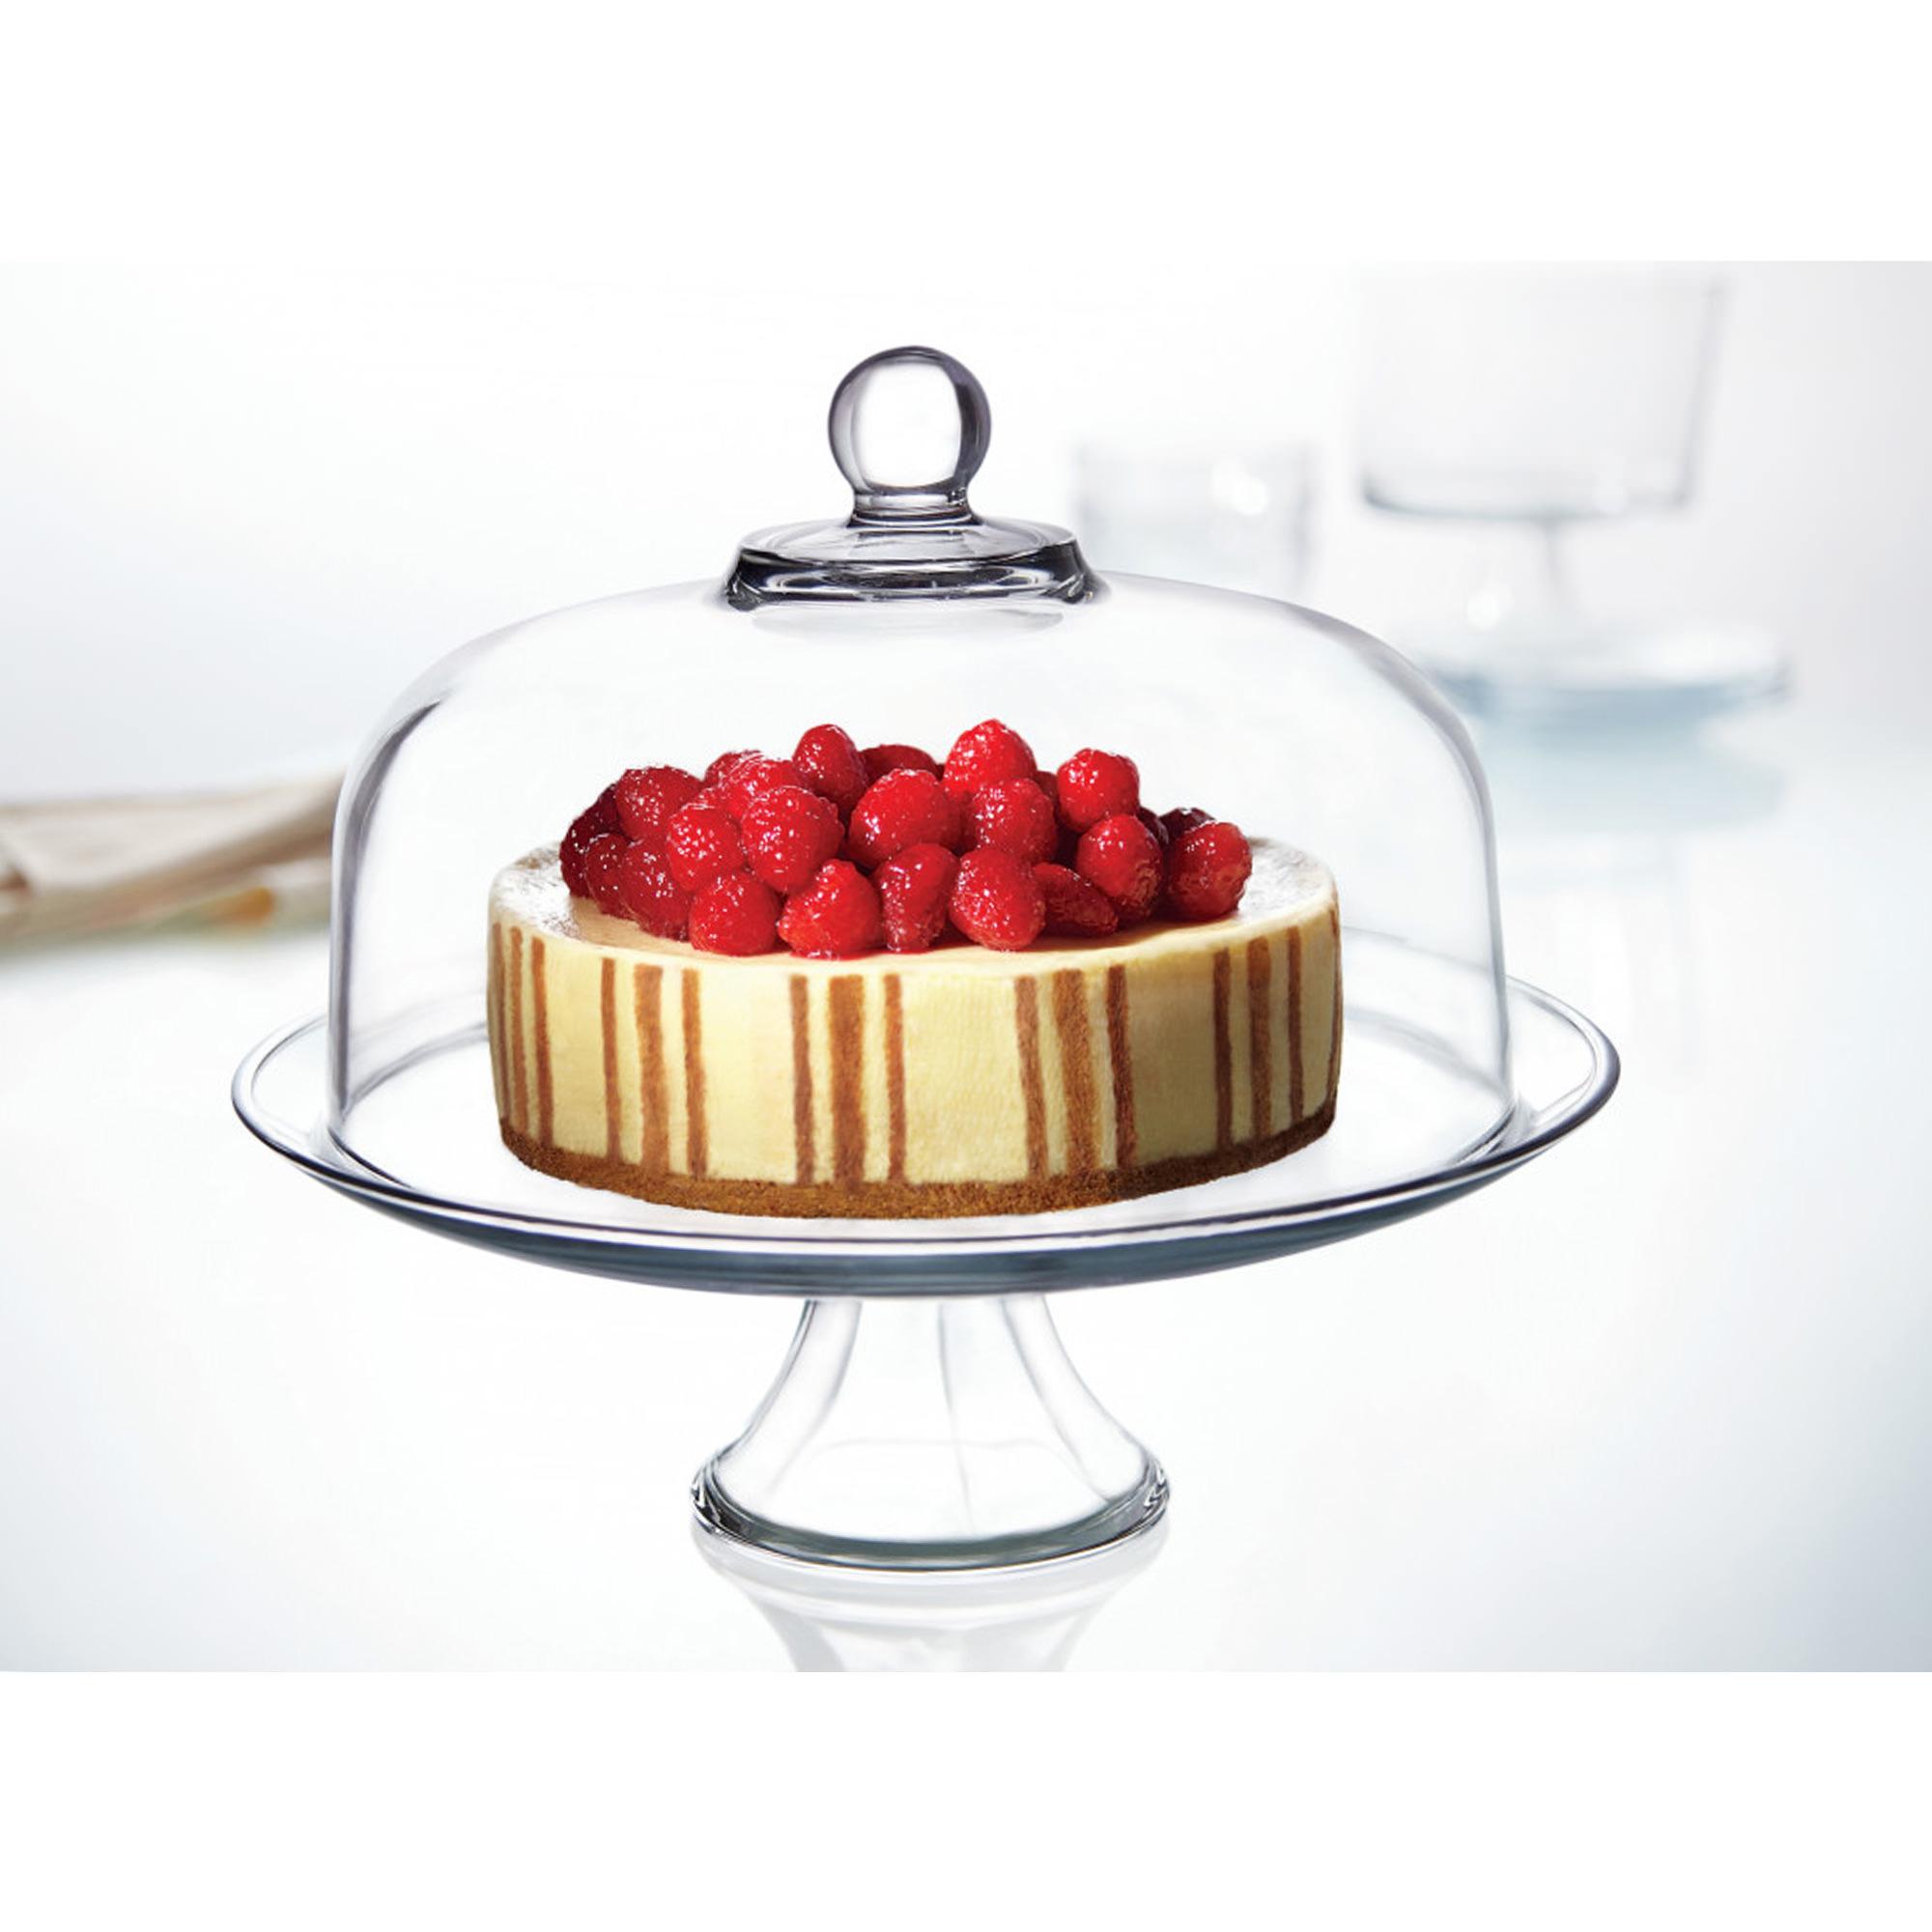 Anchor Hocking Presence Cake Stand & Dome 33cm Image 3